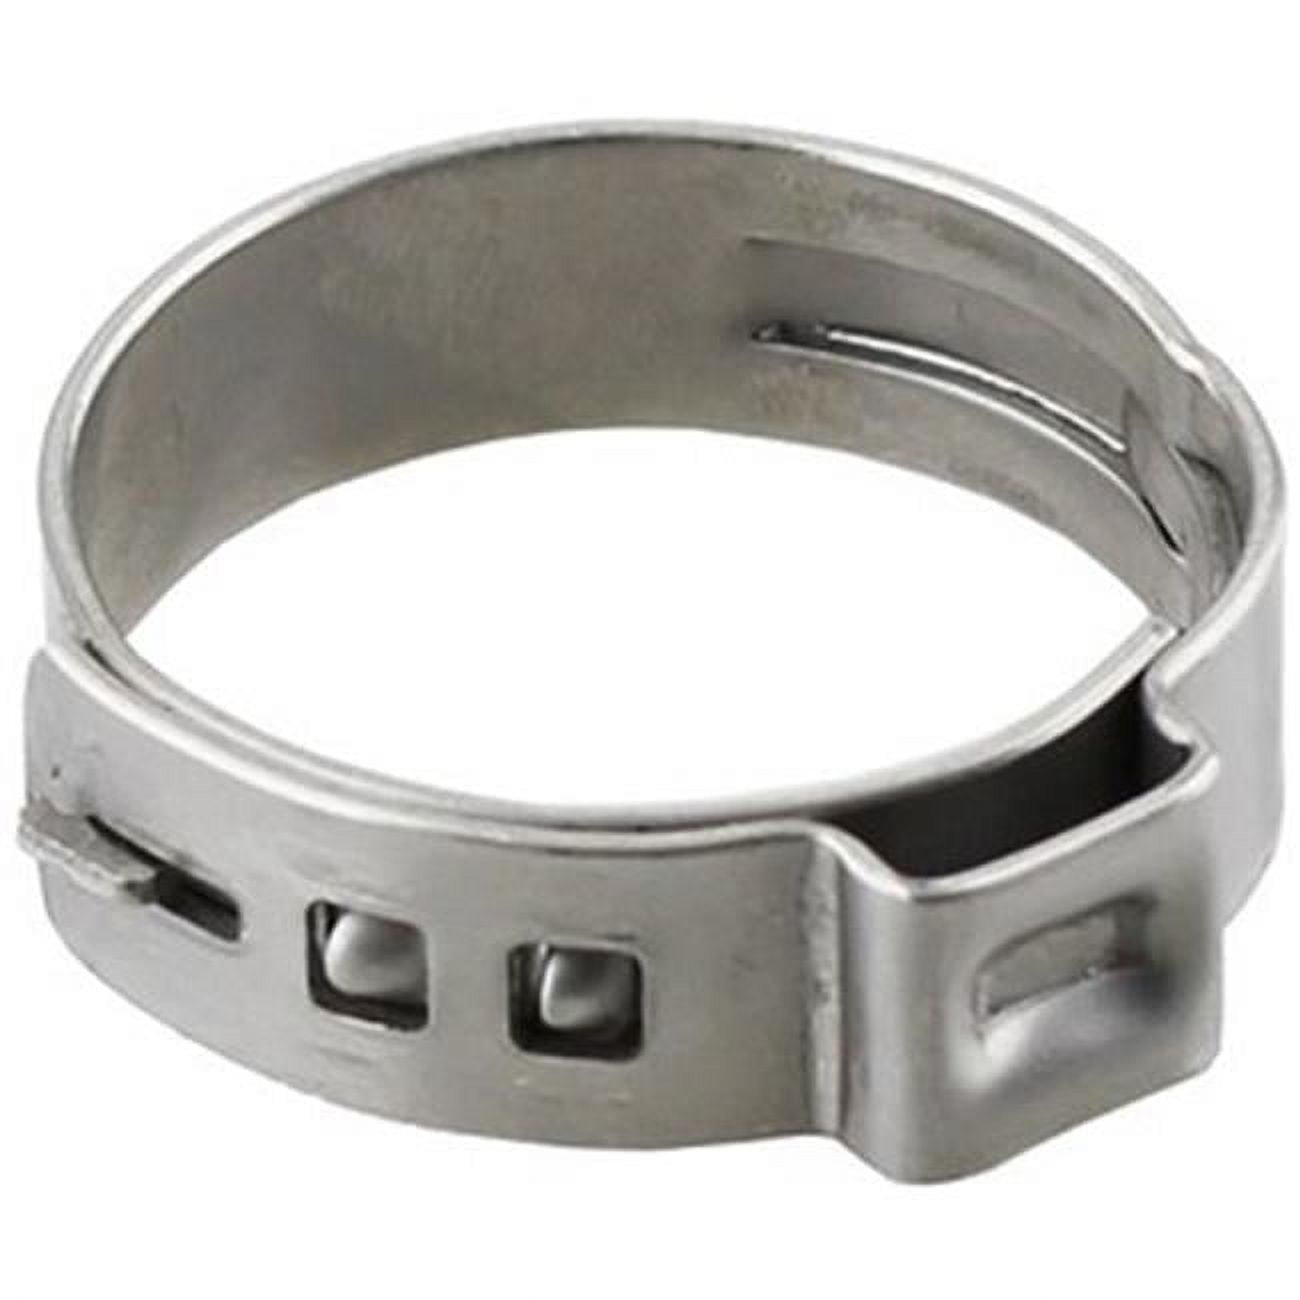 Picture of Boshart & Plumbeeze PE-PS-PC07-50 0.75 in. Stainless Steel PEX Pinch Clamp - Pack of 50